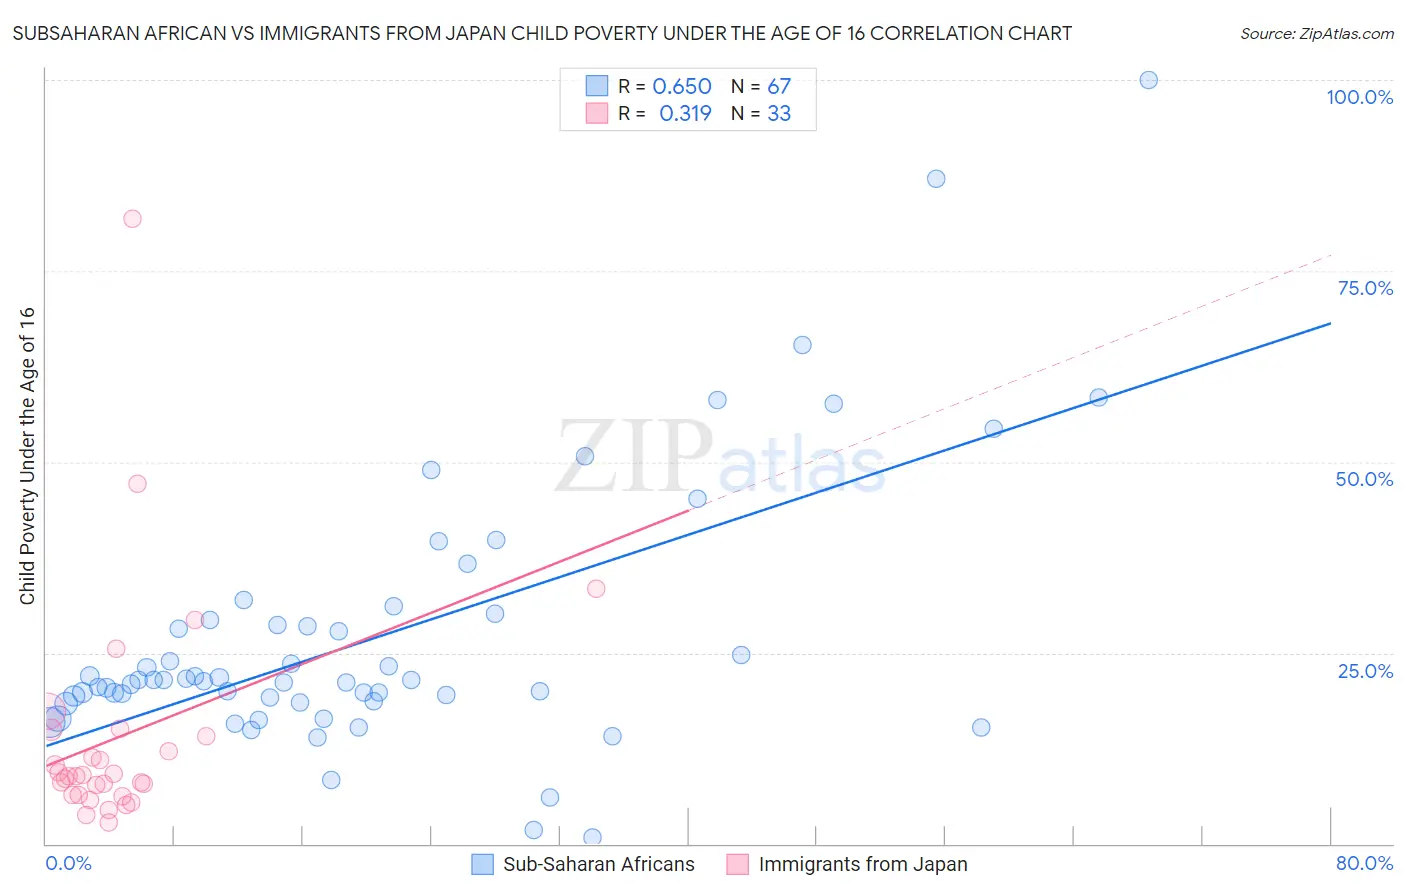 Subsaharan African vs Immigrants from Japan Child Poverty Under the Age of 16